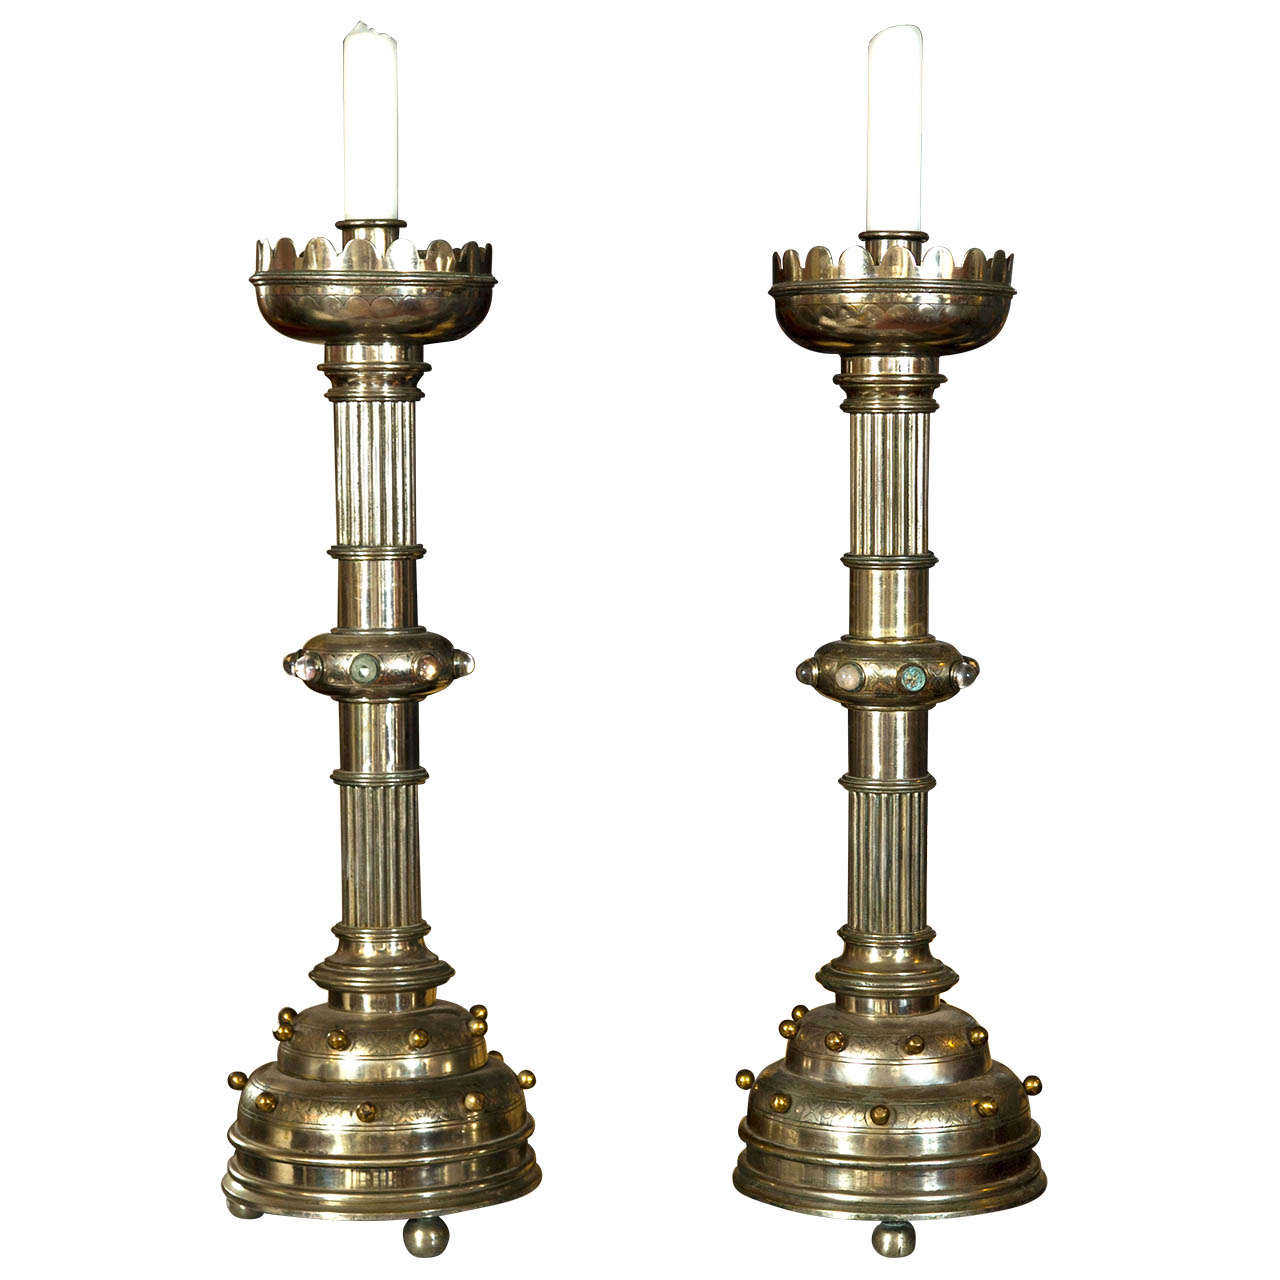 Pair of Turn of Century Candle Dora For Sale